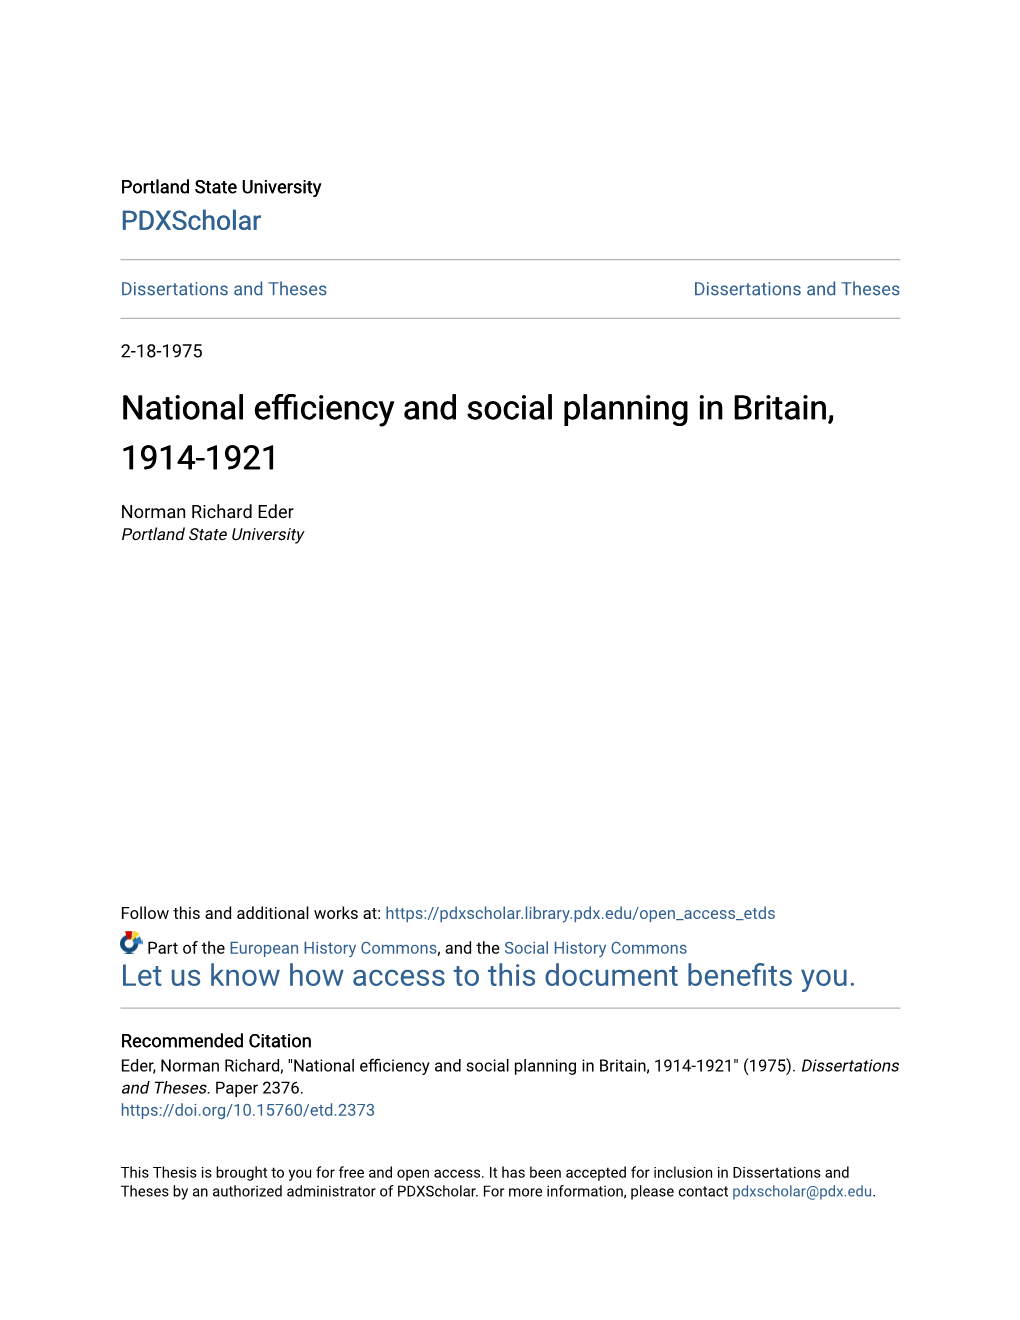 National Efficiency and Social Planning in Britain, 1914-1921